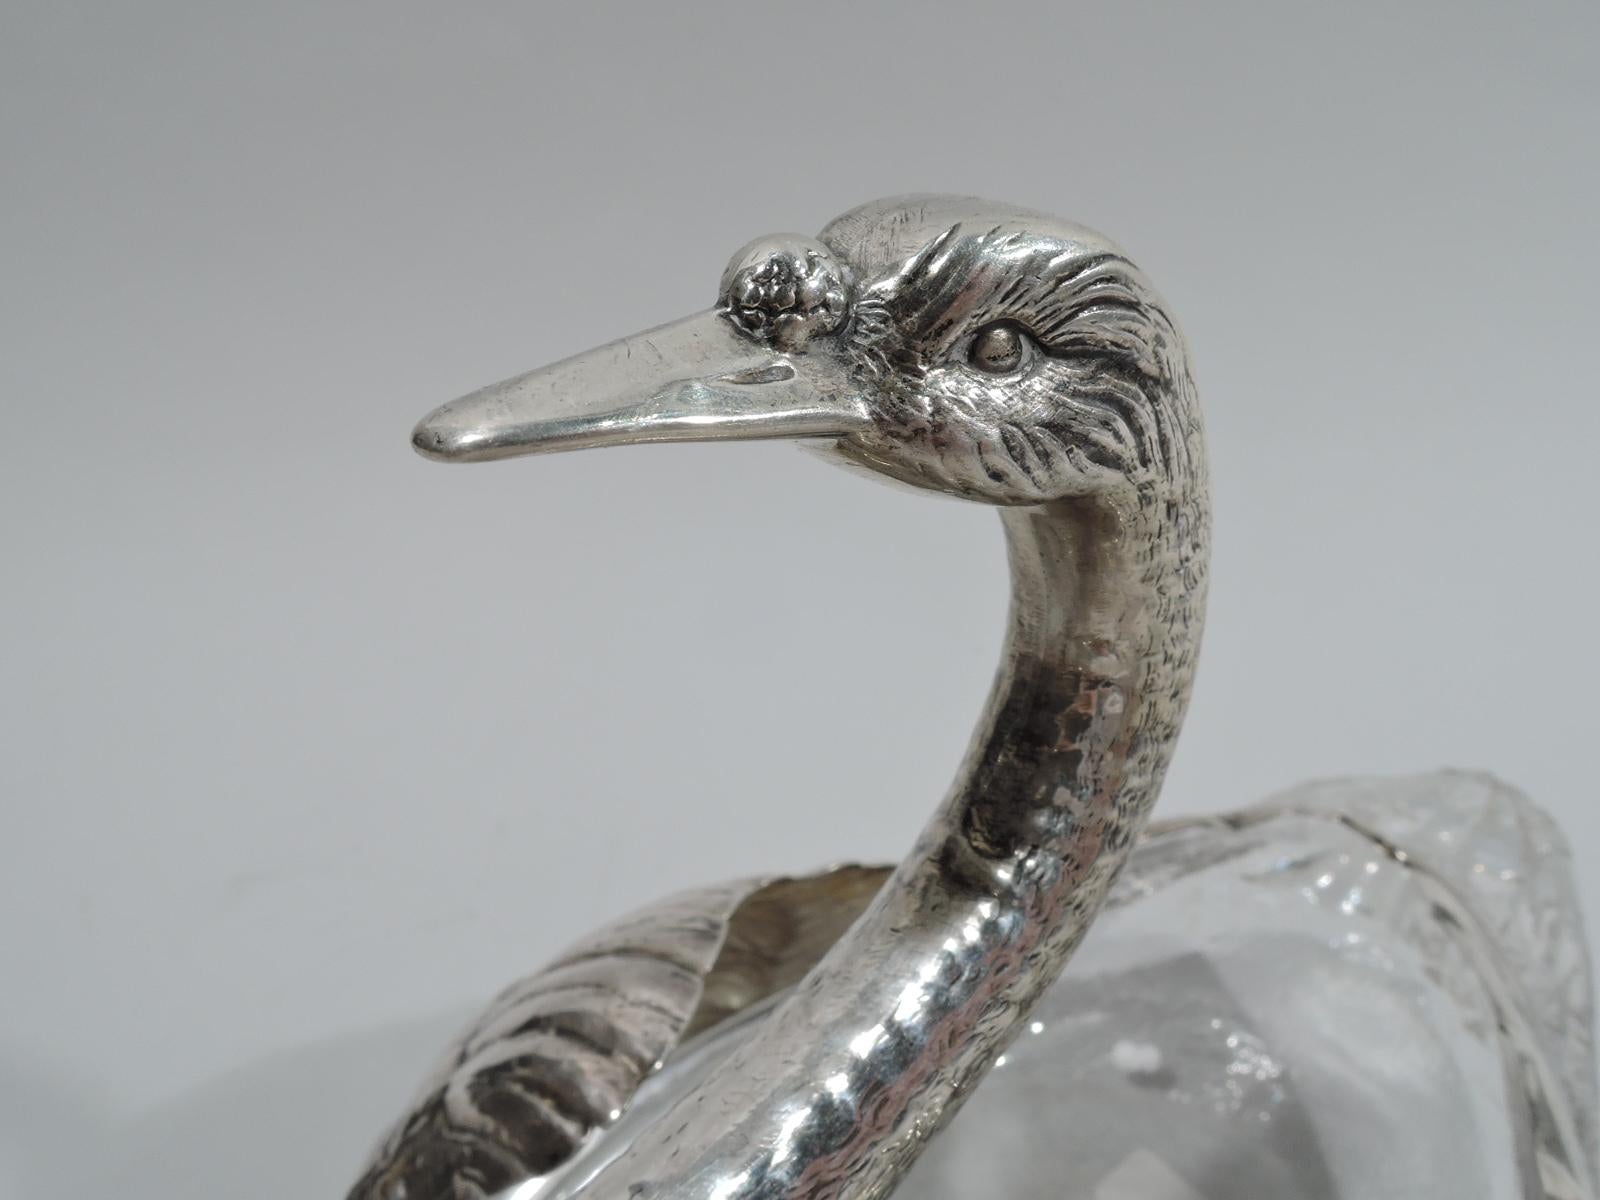 Pair of American Edwardian sterling silver and glass swans, ca 1920. Each: Glass body with imbricated tail feathers. Sterling silver mouth with plumy wings and graceful s-scroll neck and head with penetrating gaze and long and closed bill. Both